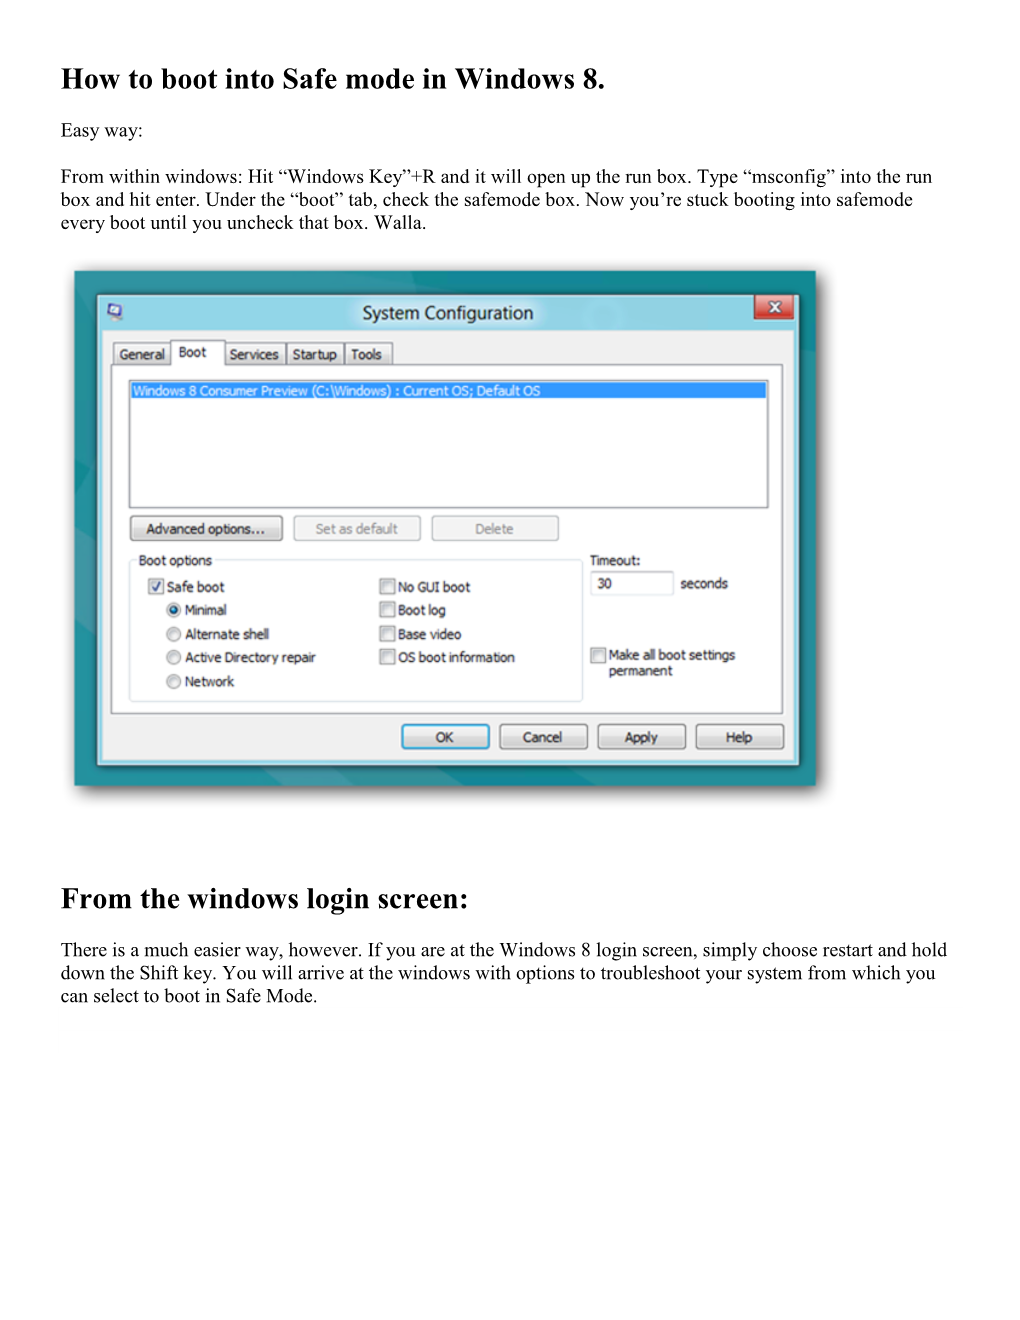 How to Boot Into Safe Mode in Windows 8. from the Windows Login